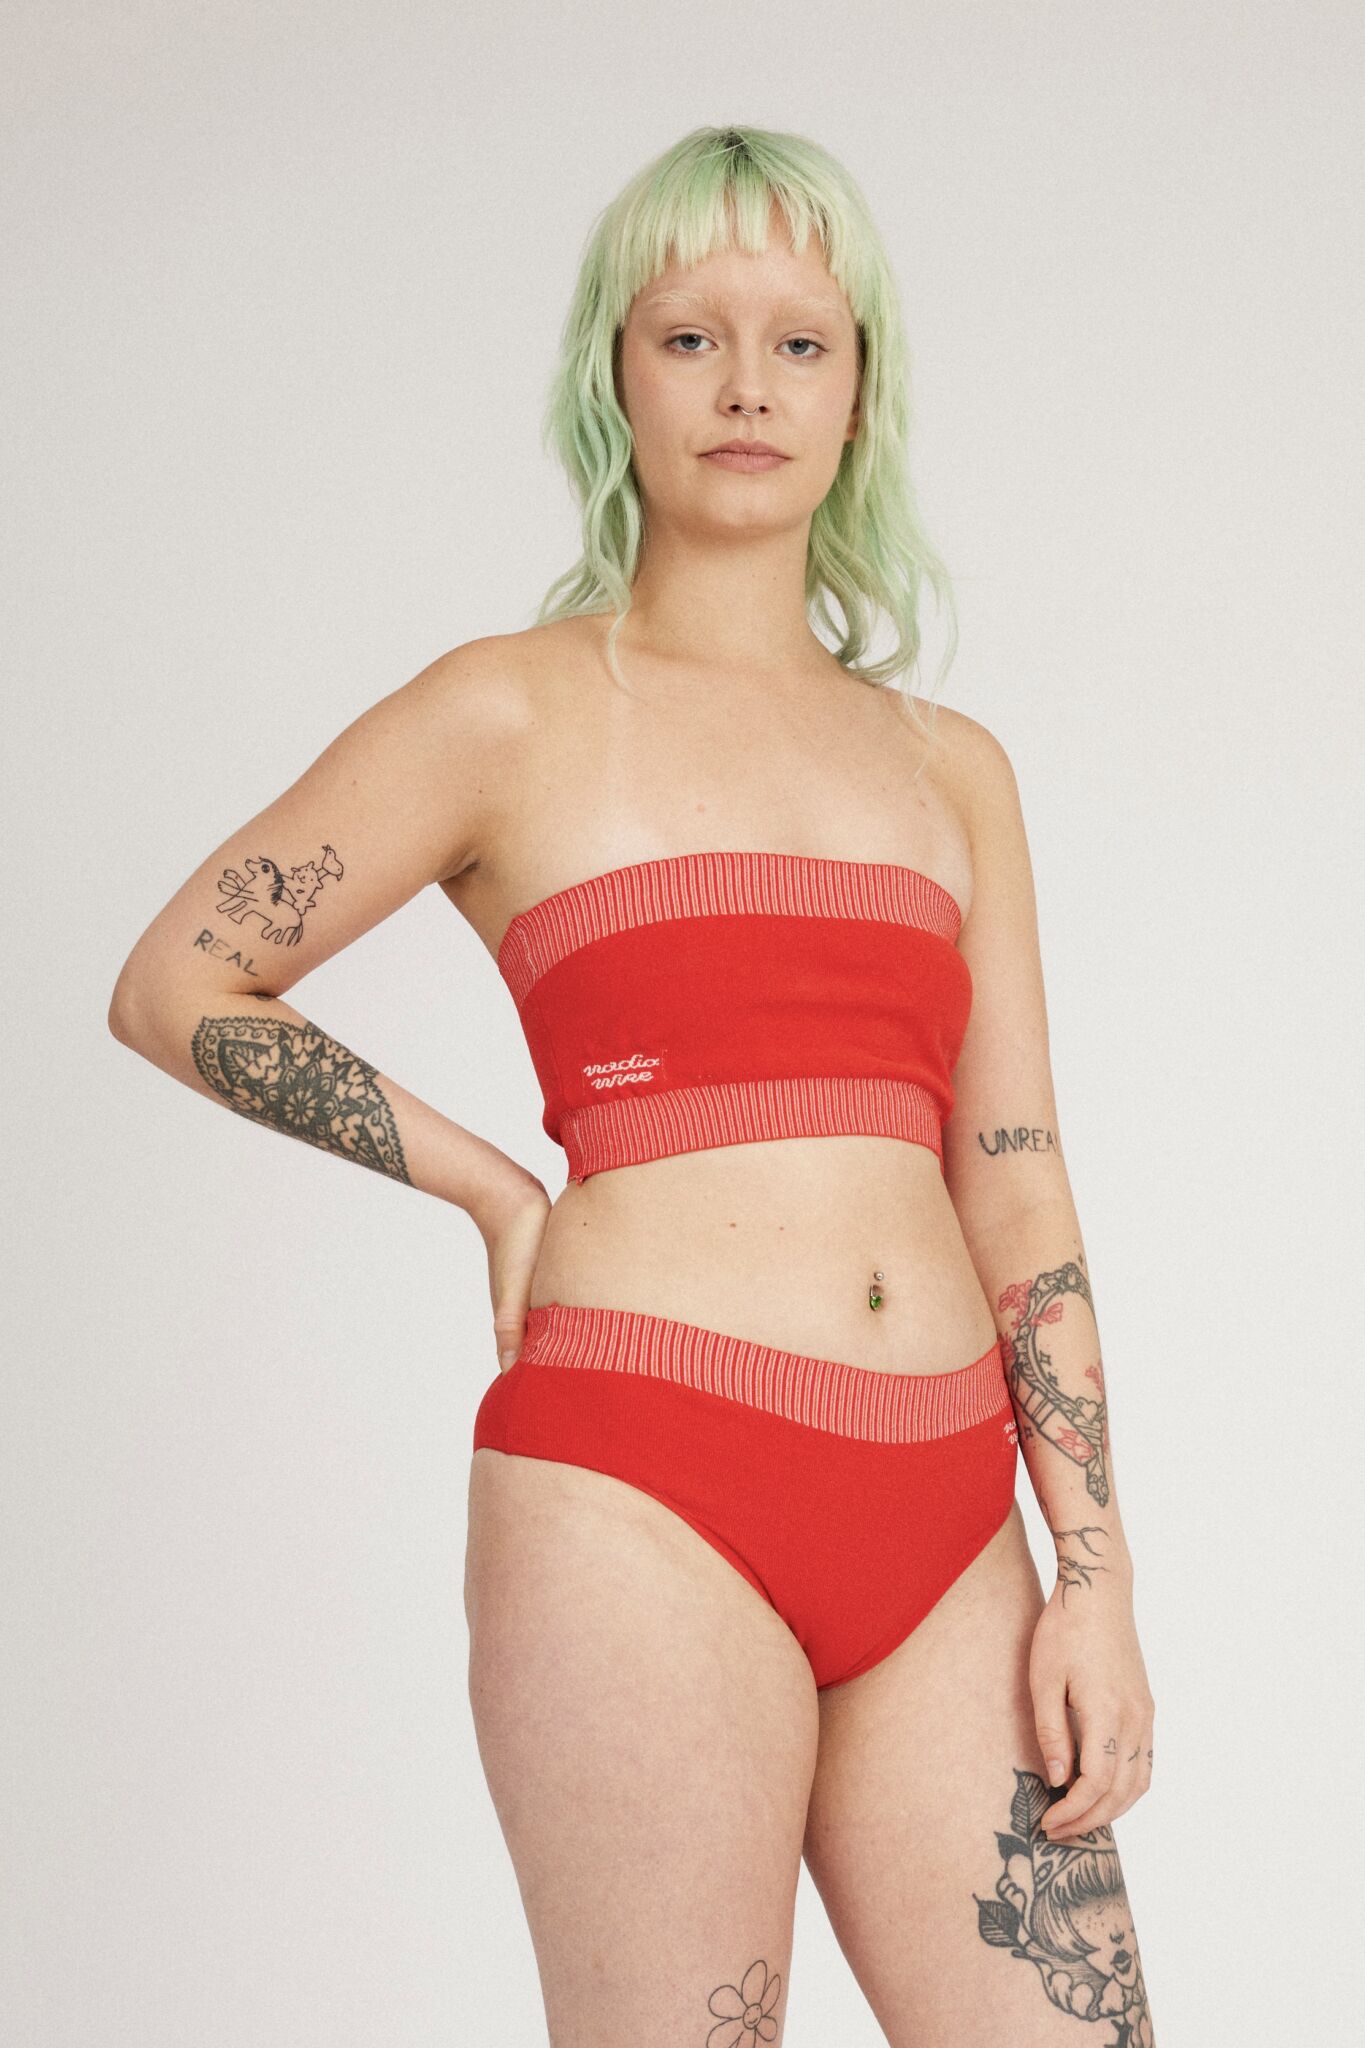 Spring Bloomer Top in red and pink is a knitted sporty tube top with logo and ribbed edges. Knitted in a body fitted, yet flexible material that adapts to the body. Can be mixed and matched with Spring Bloomer Panty and be used as swimwear.